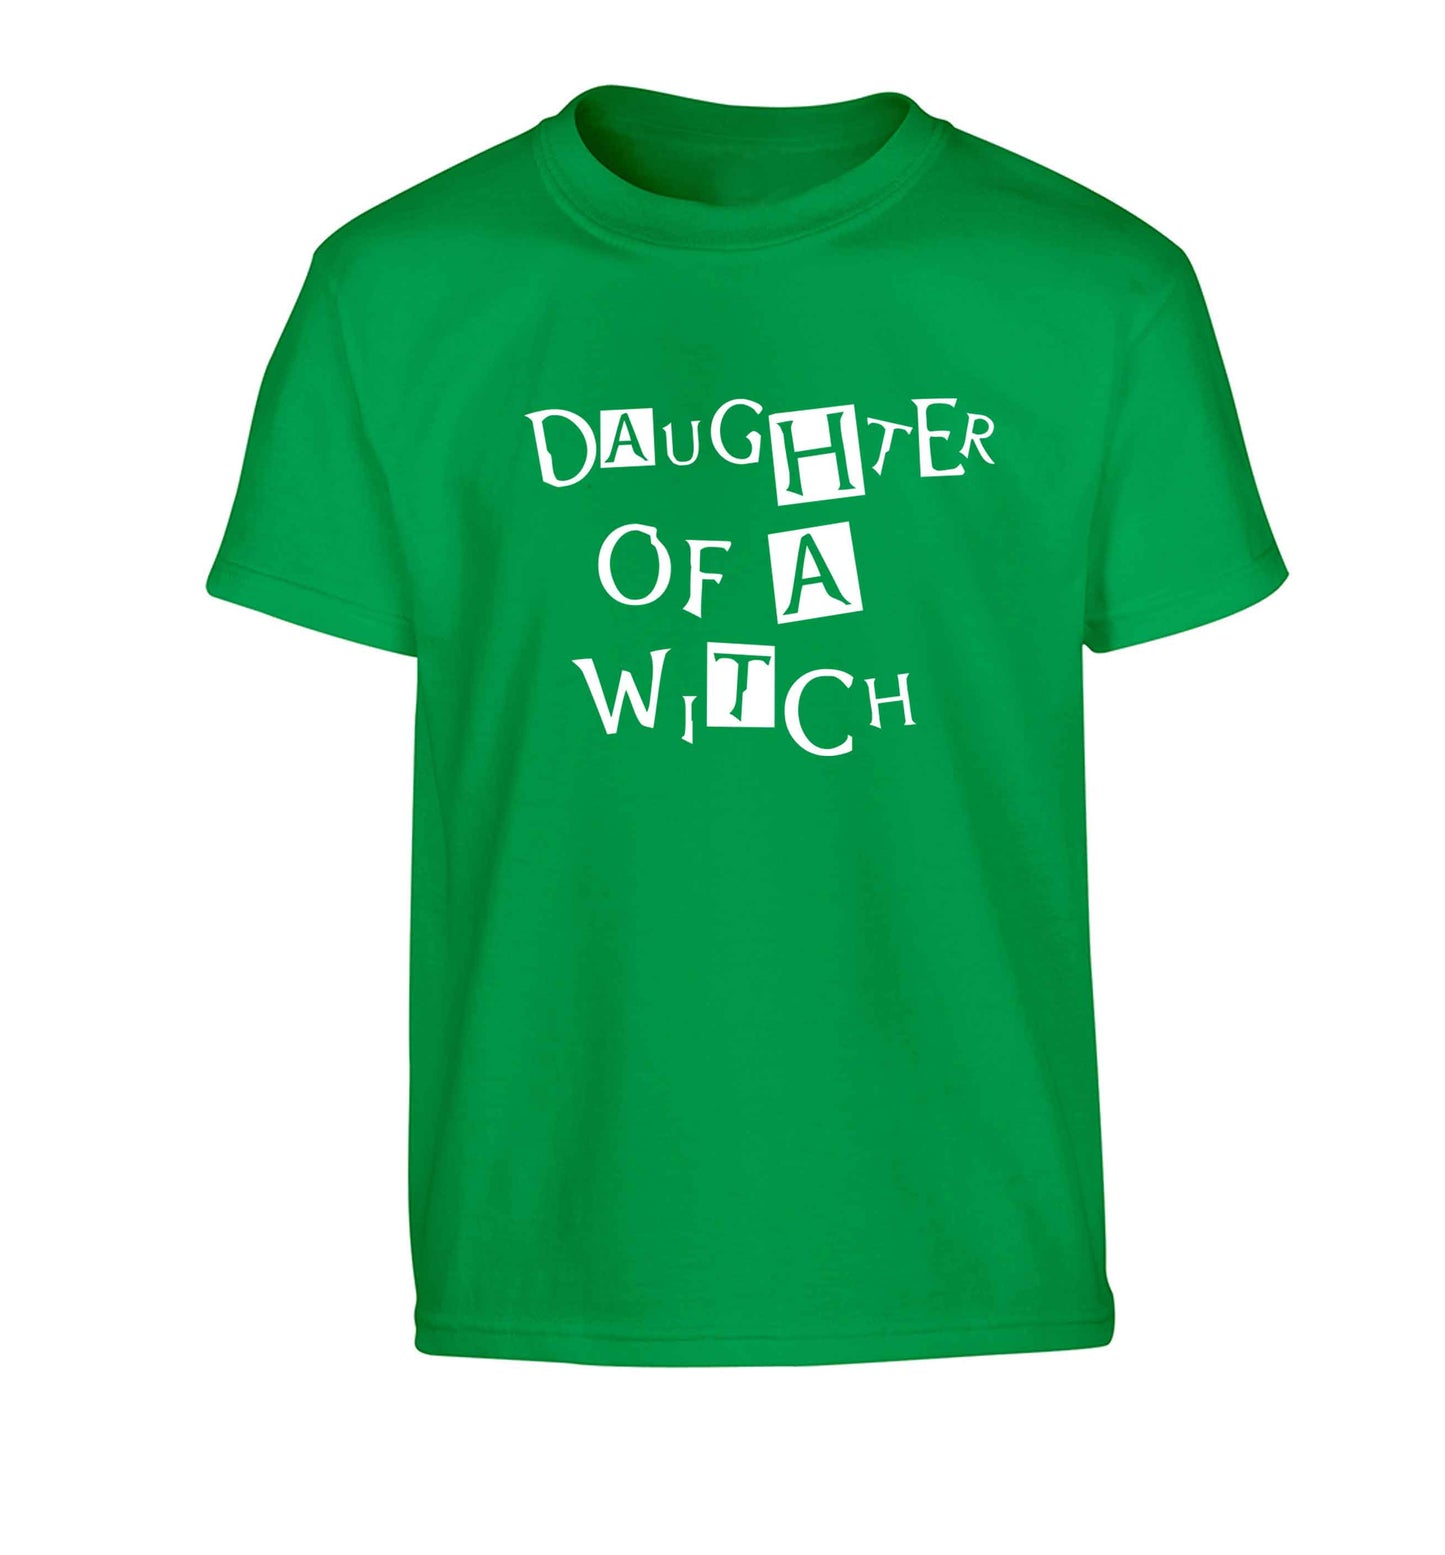 Daughter of a witch Children's green Tshirt 12-13 Years